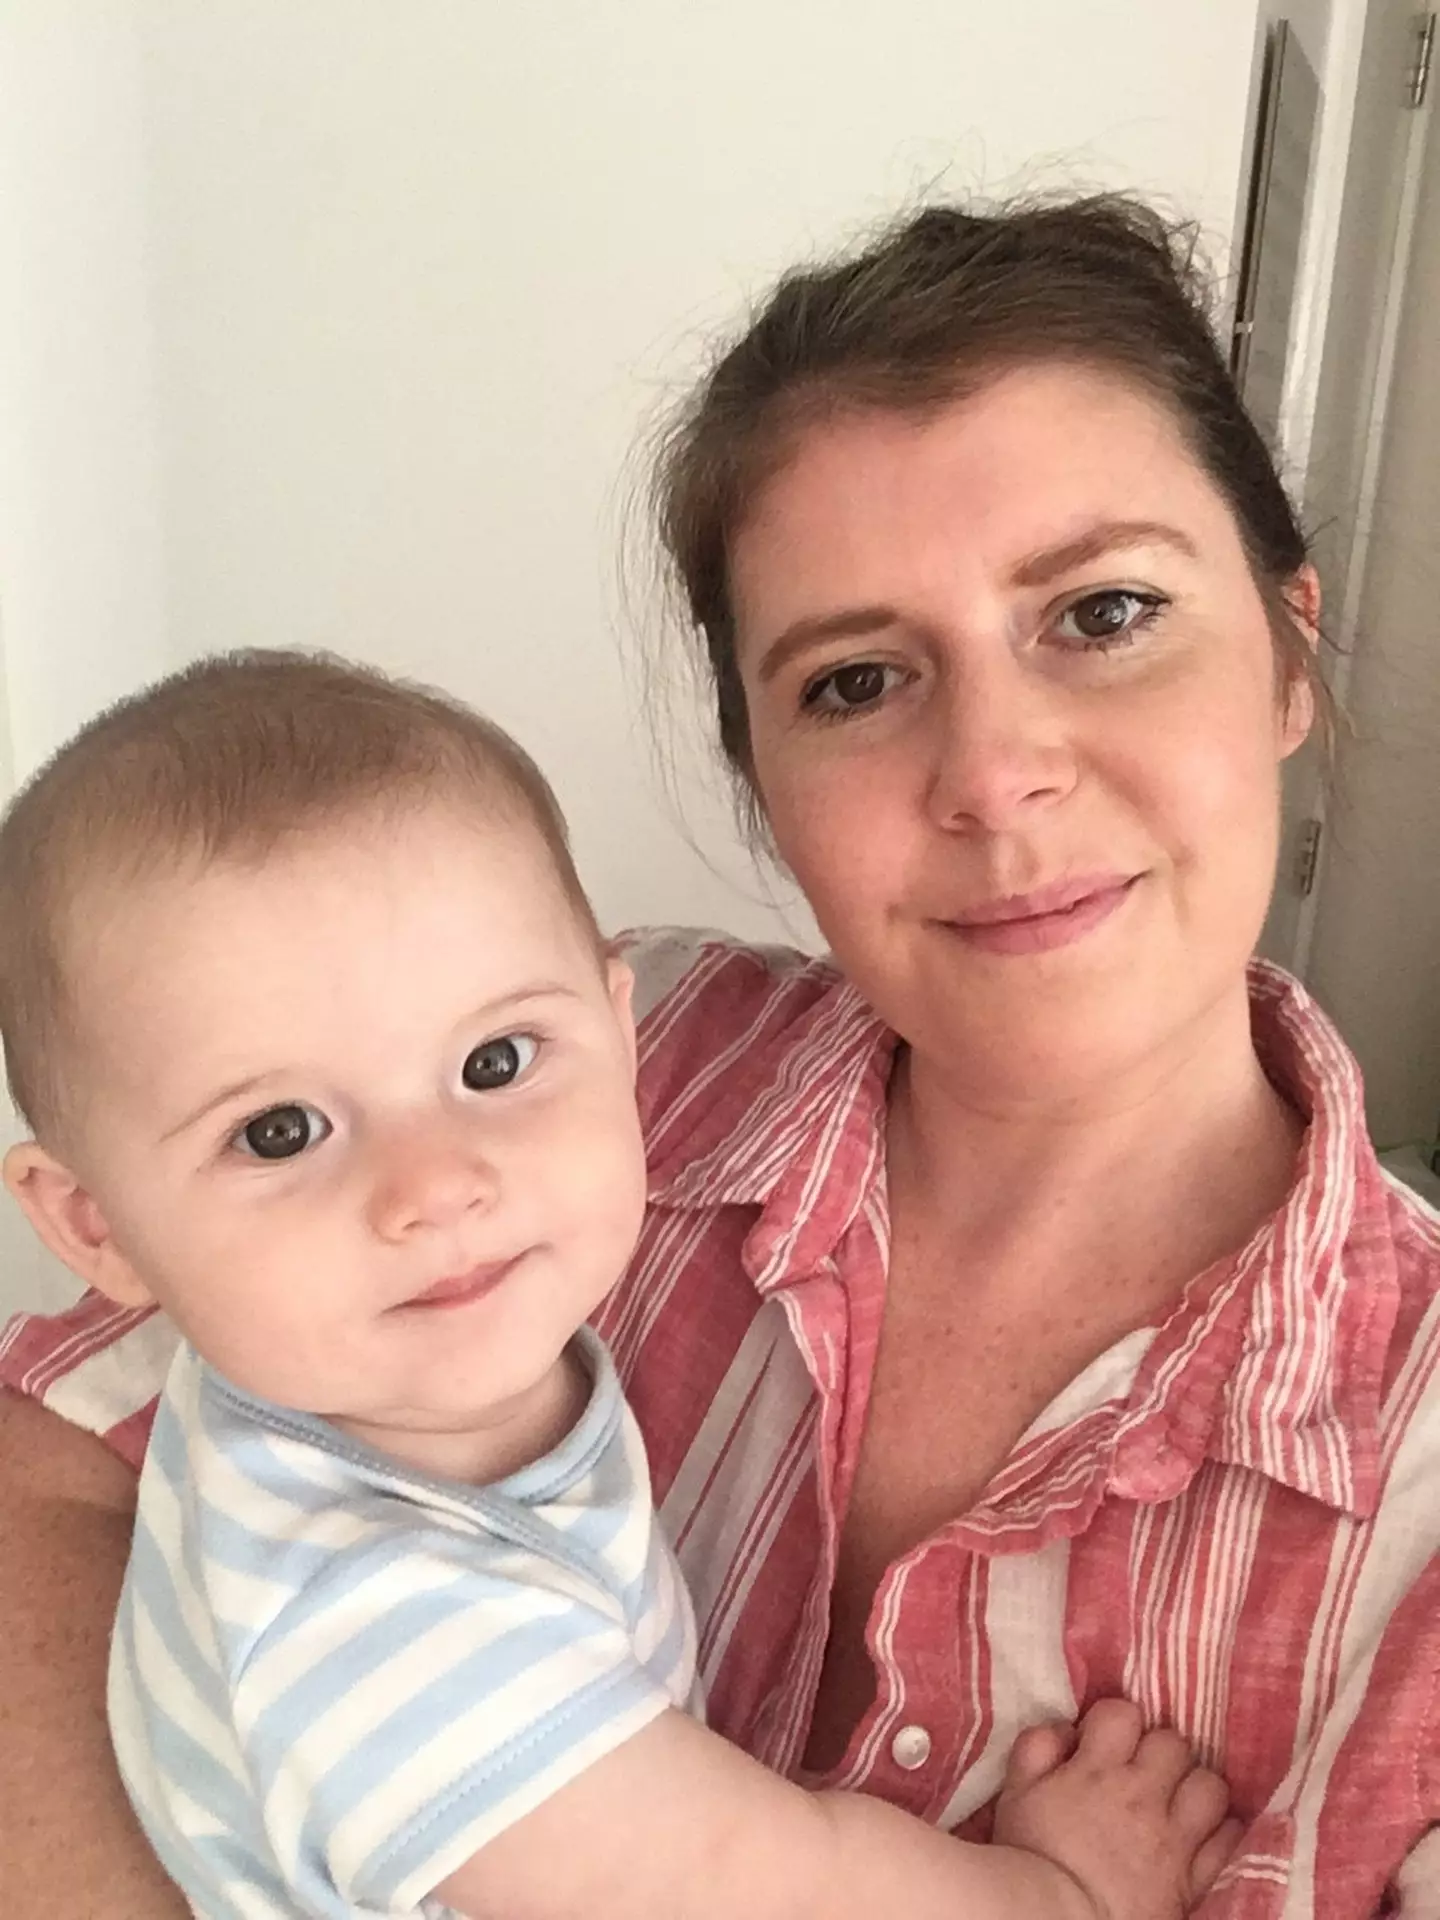 Claire was 20 weeks pregnant when she found out her mole was melanoma (